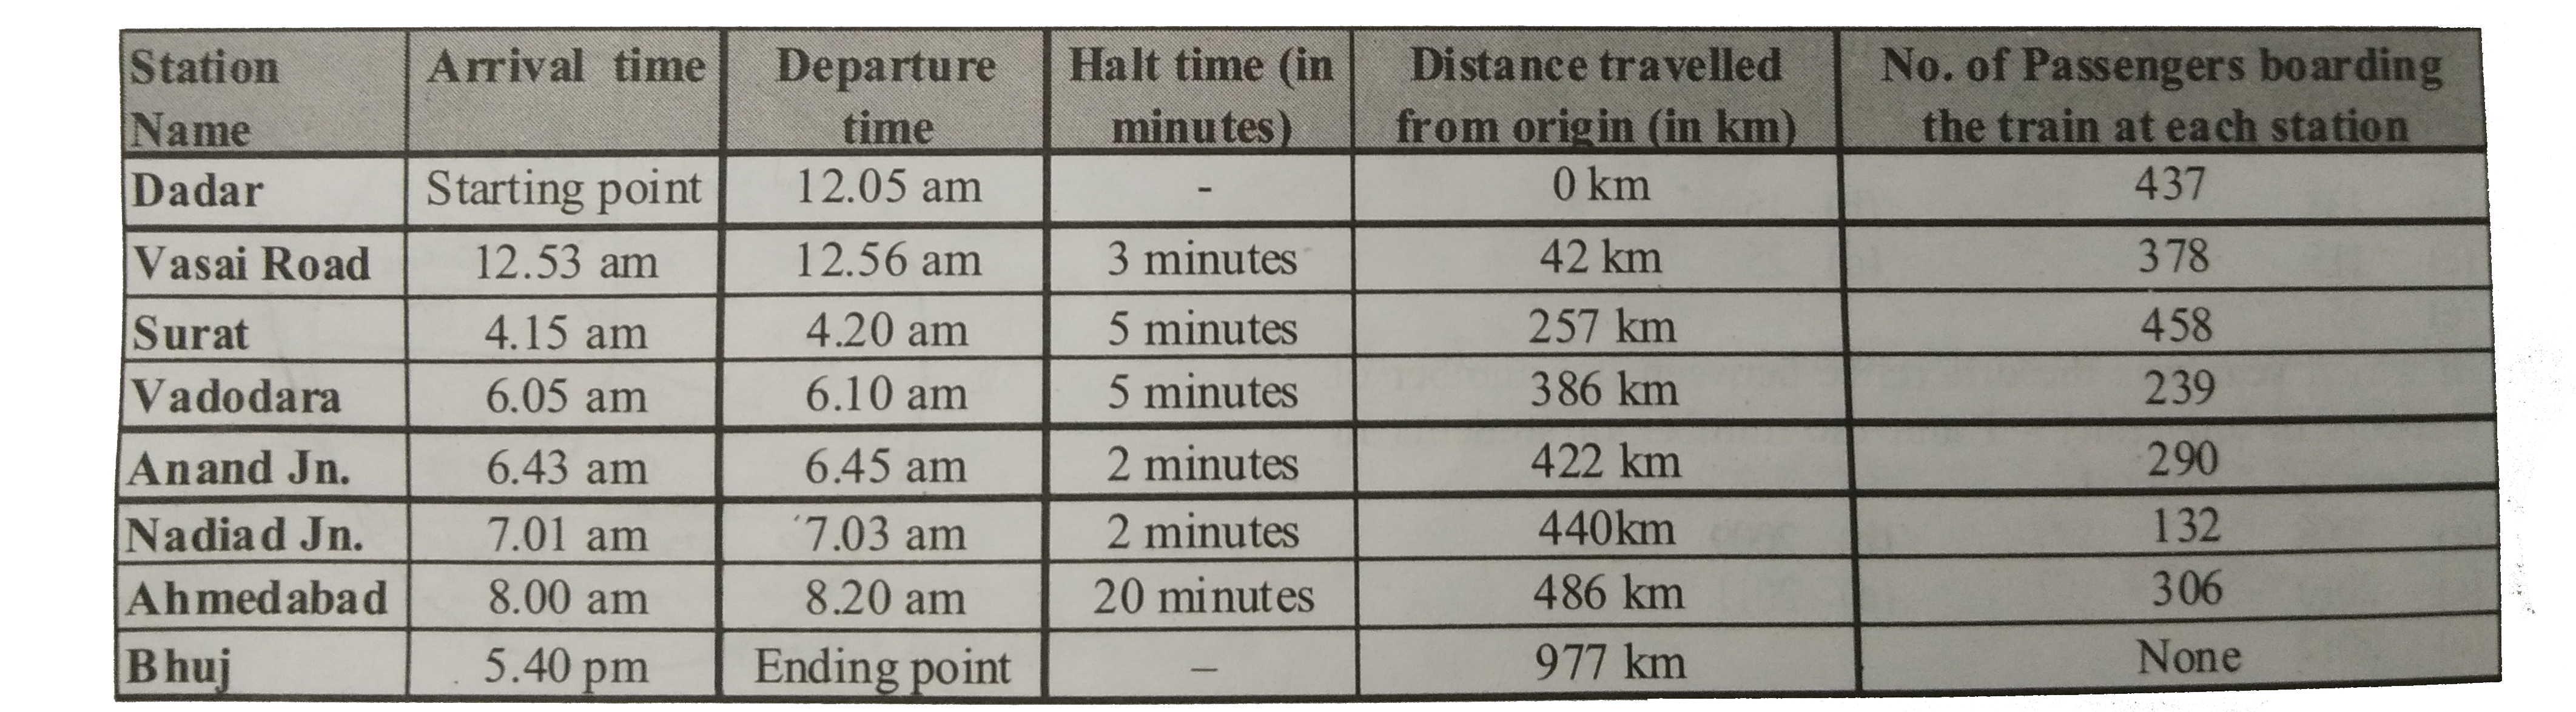 Distance between which two stations is second lowest ?